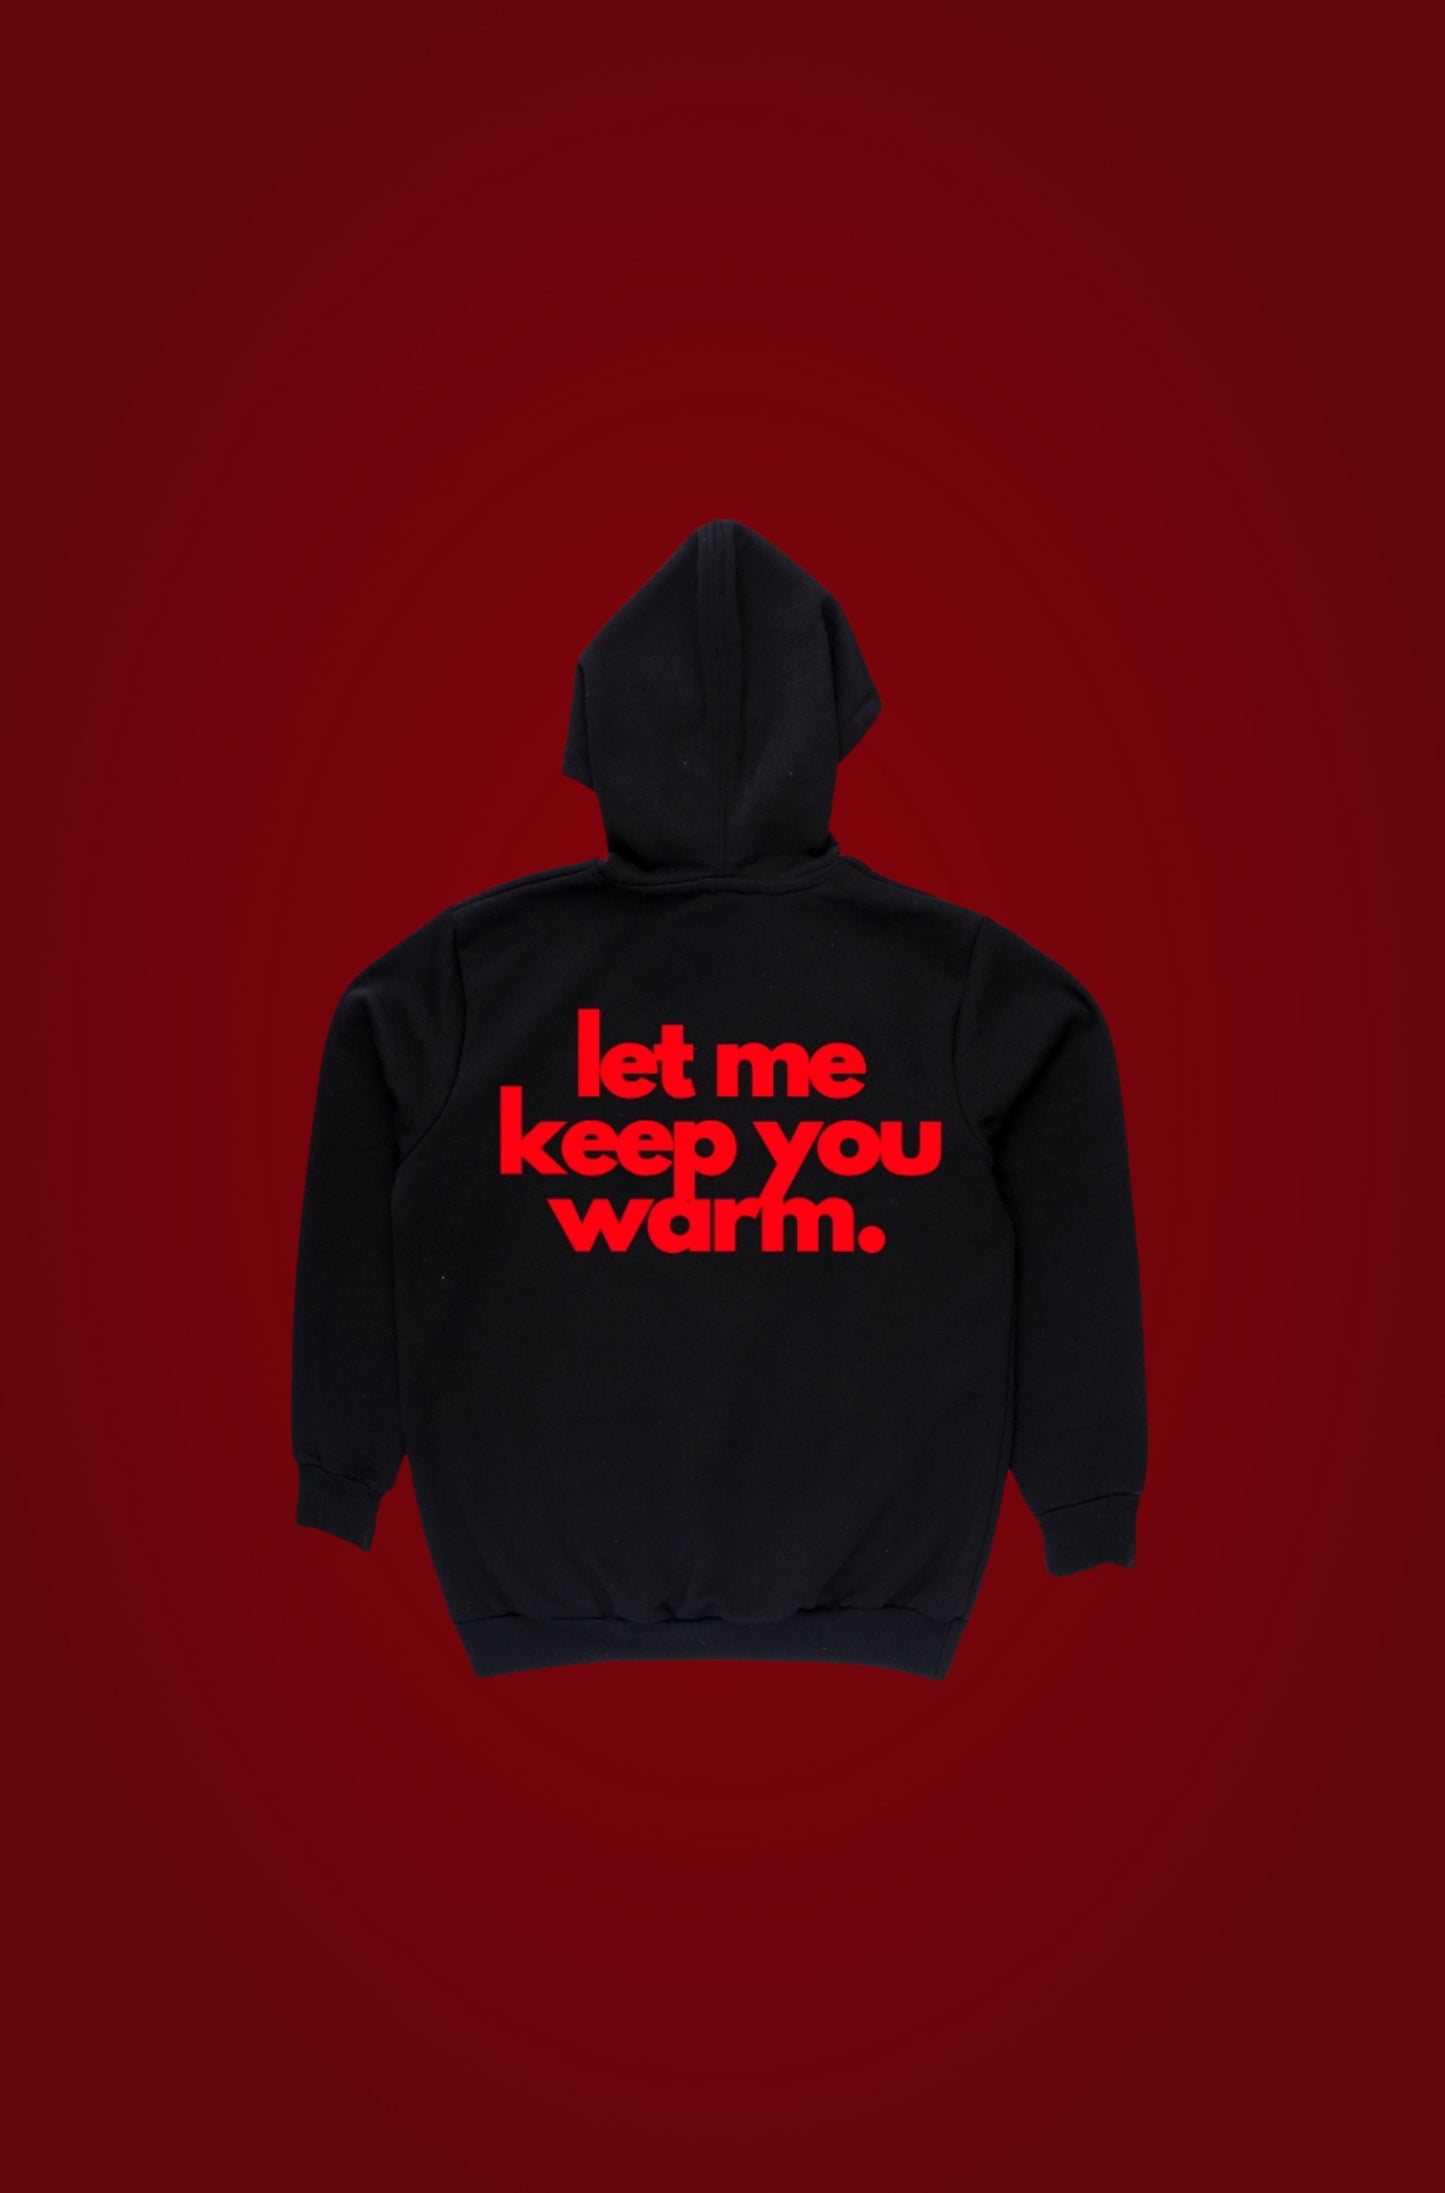 let me keep you warm.